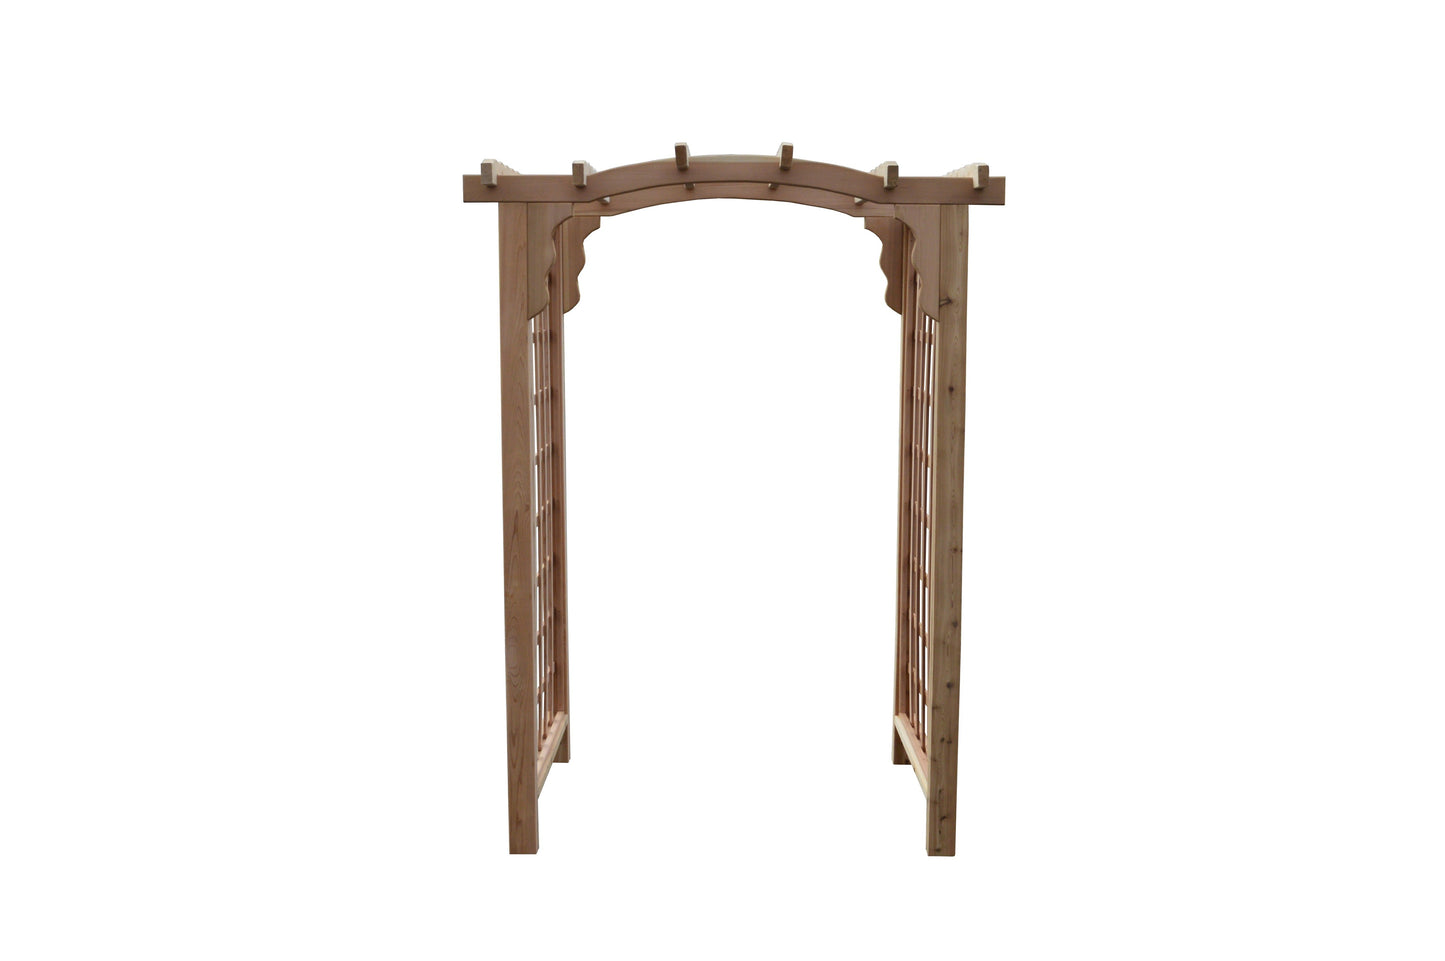 A&L Furniture Co. Western Red Cedar 5' Cambridge Arbor - LEAD TIME TO SHIP 4 WEEKS OR LESS